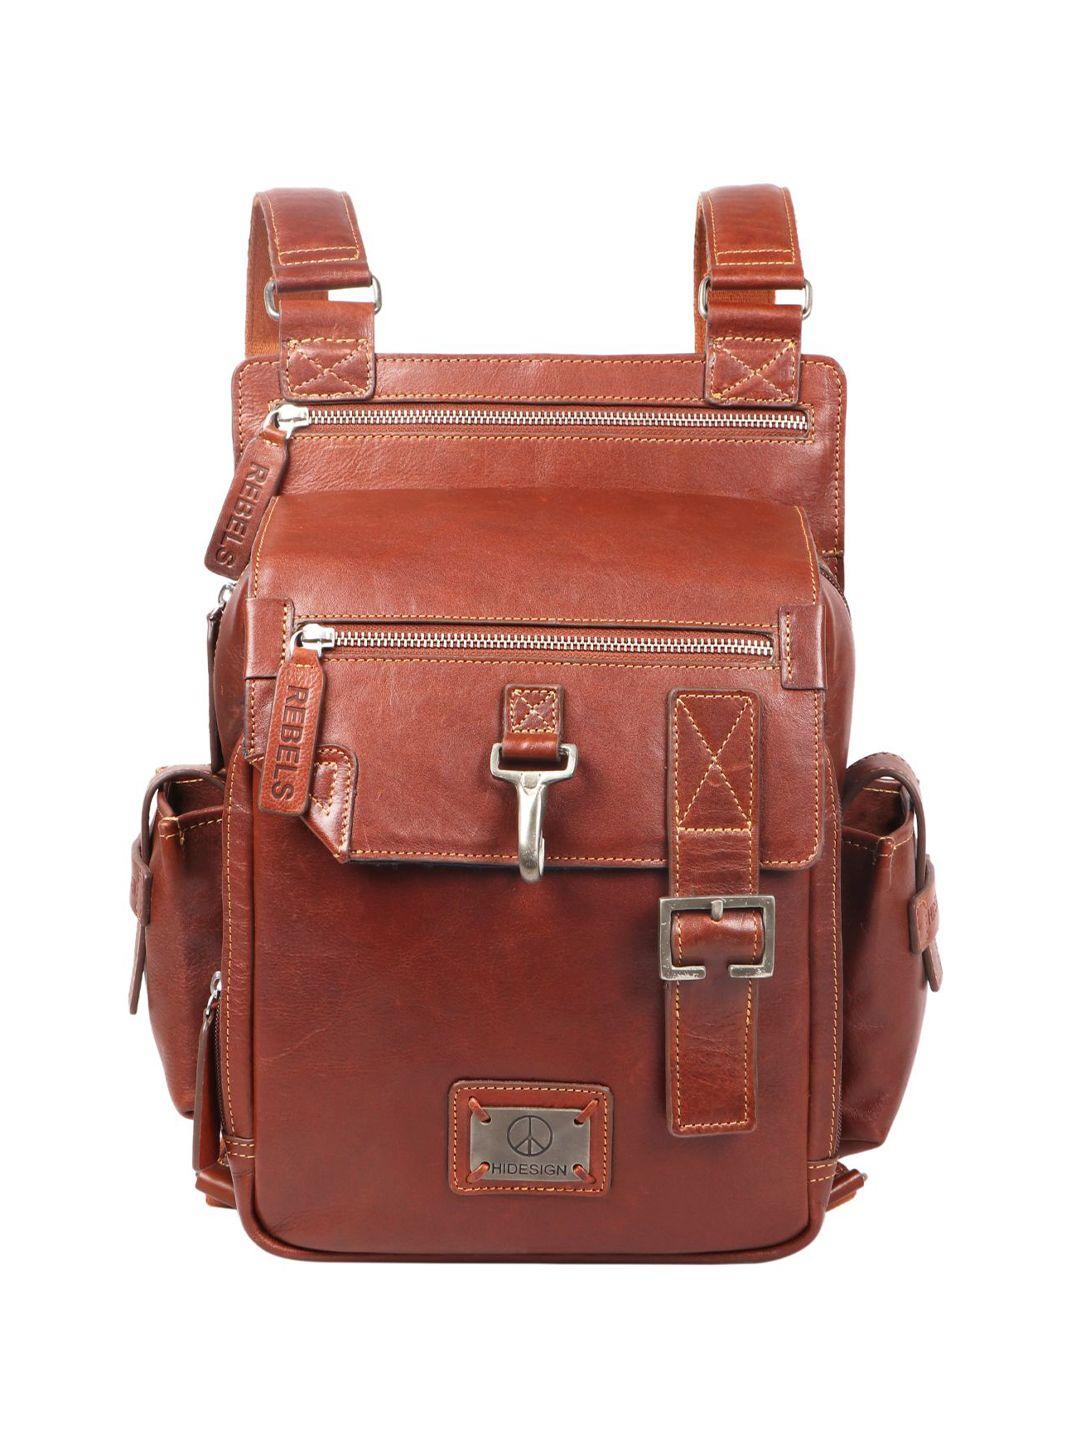 hidesign leather backpack